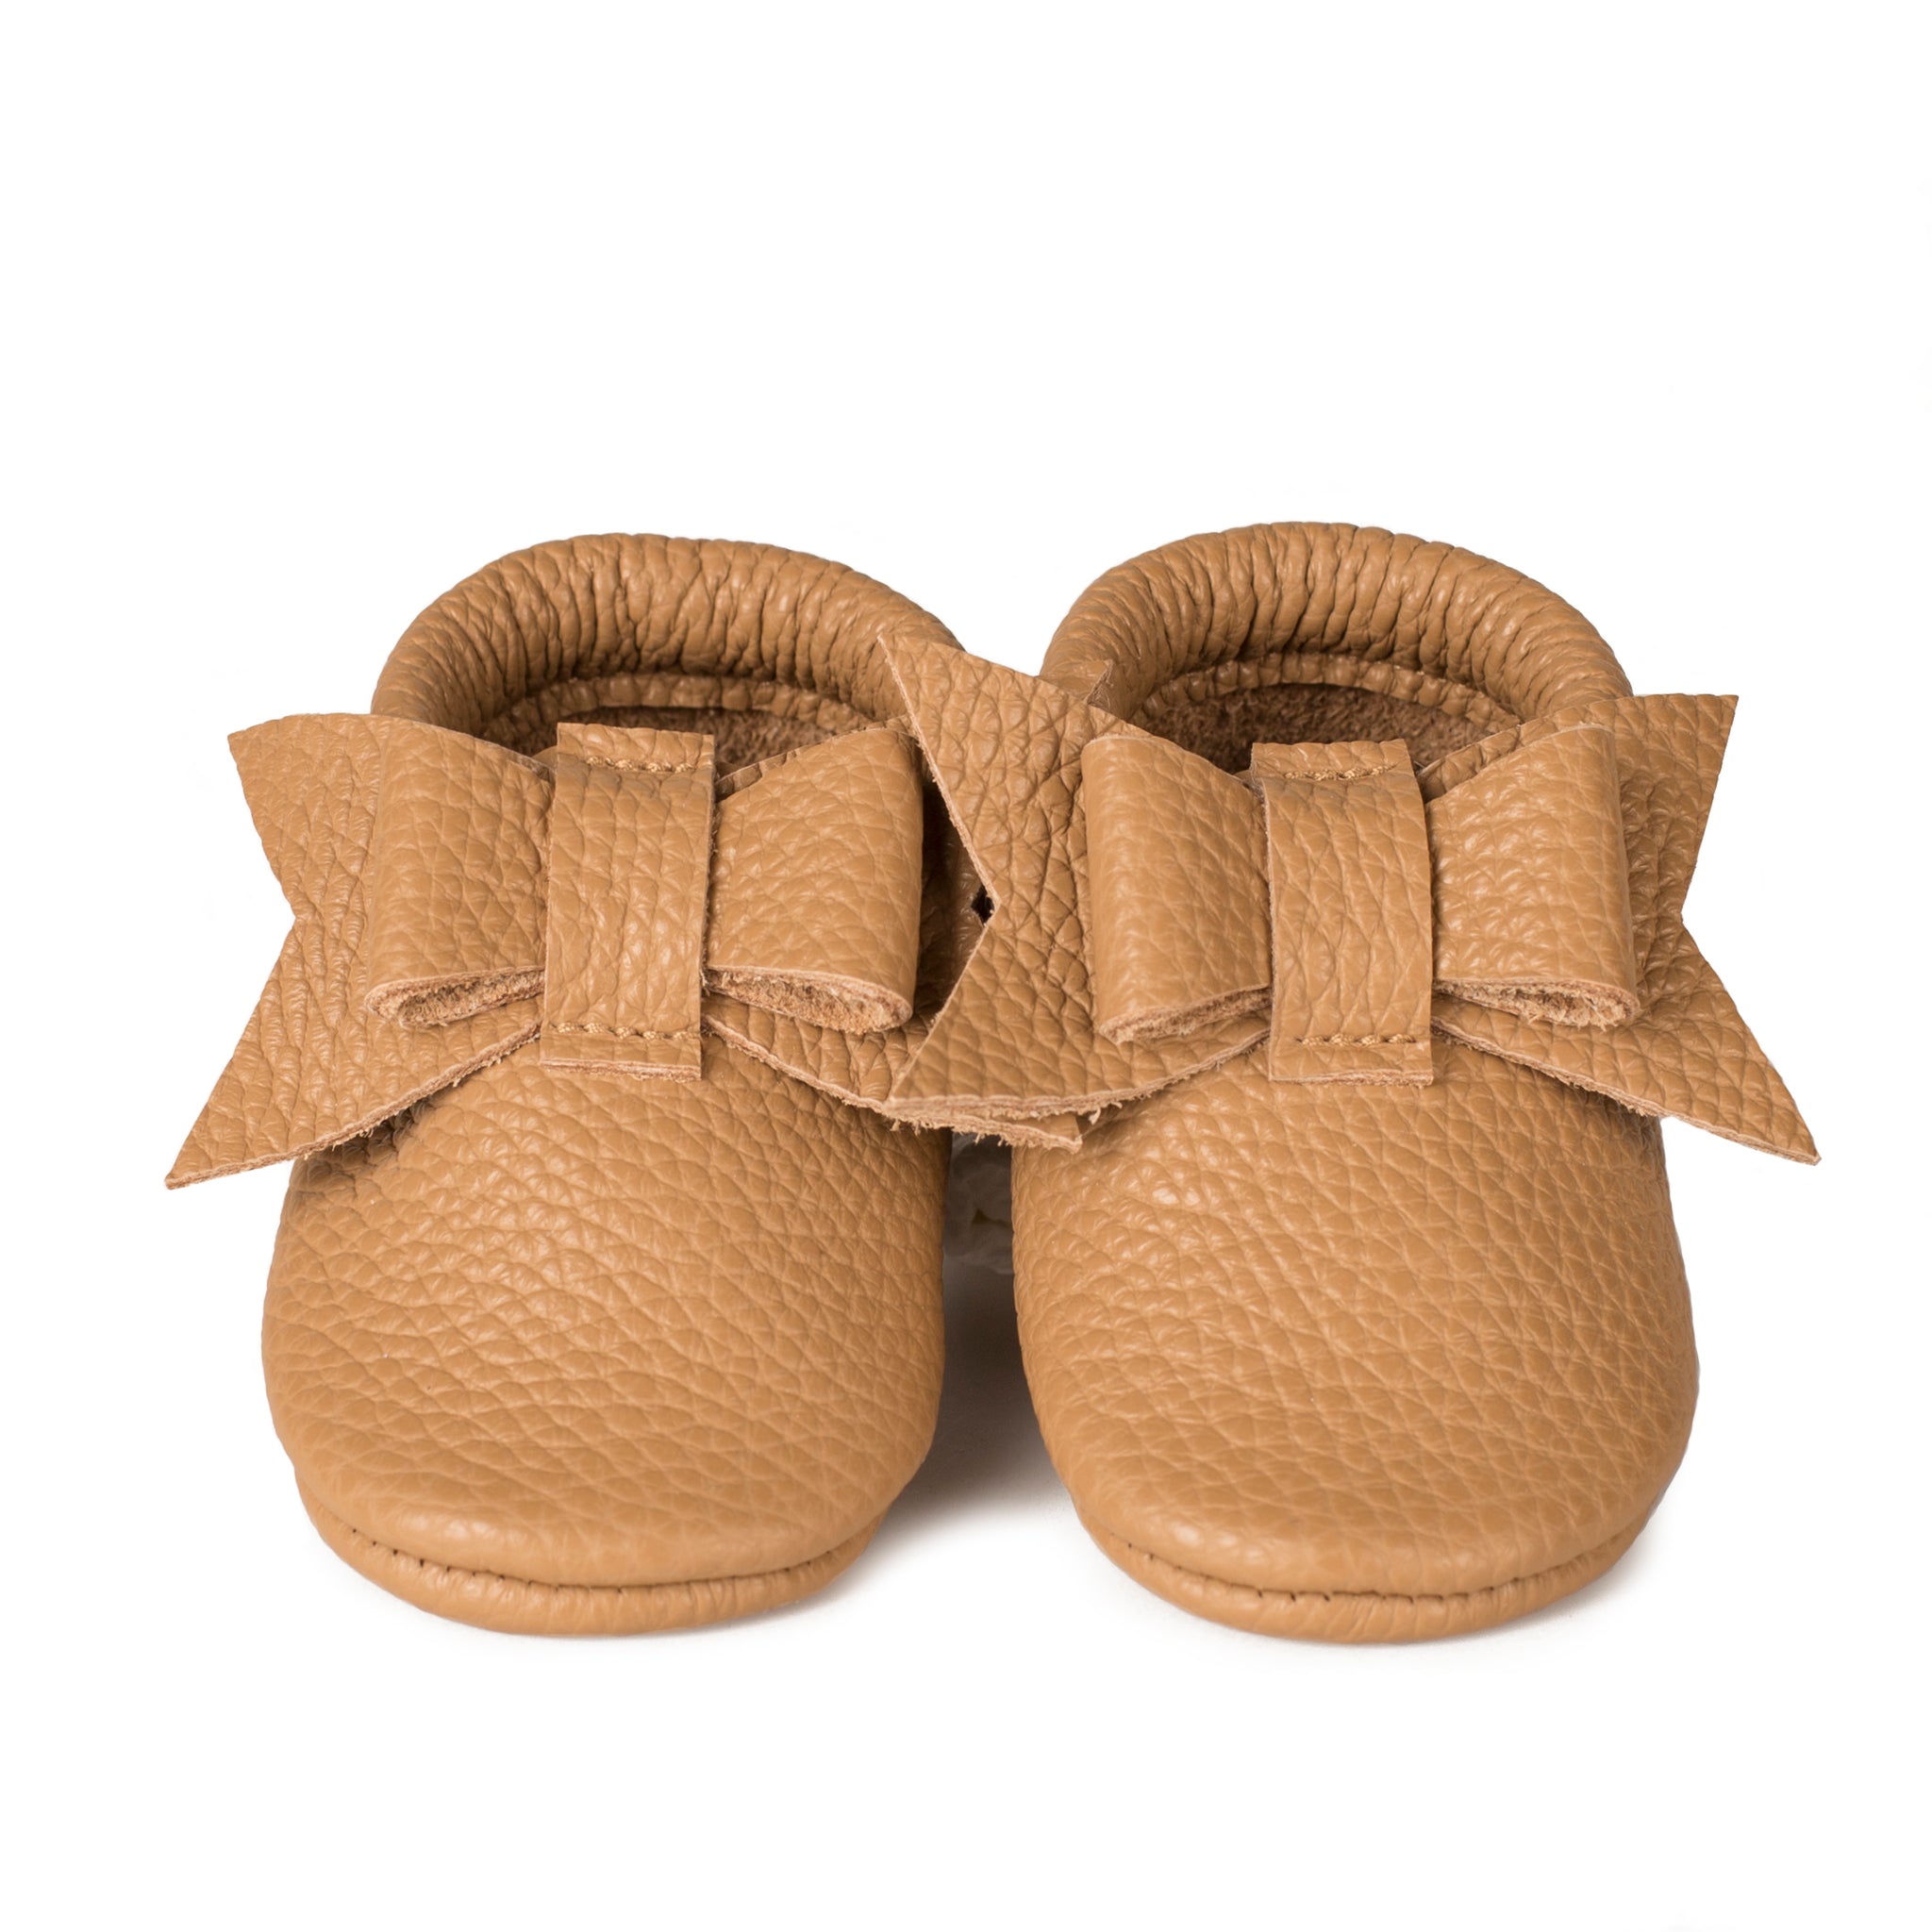 little bee moccasins